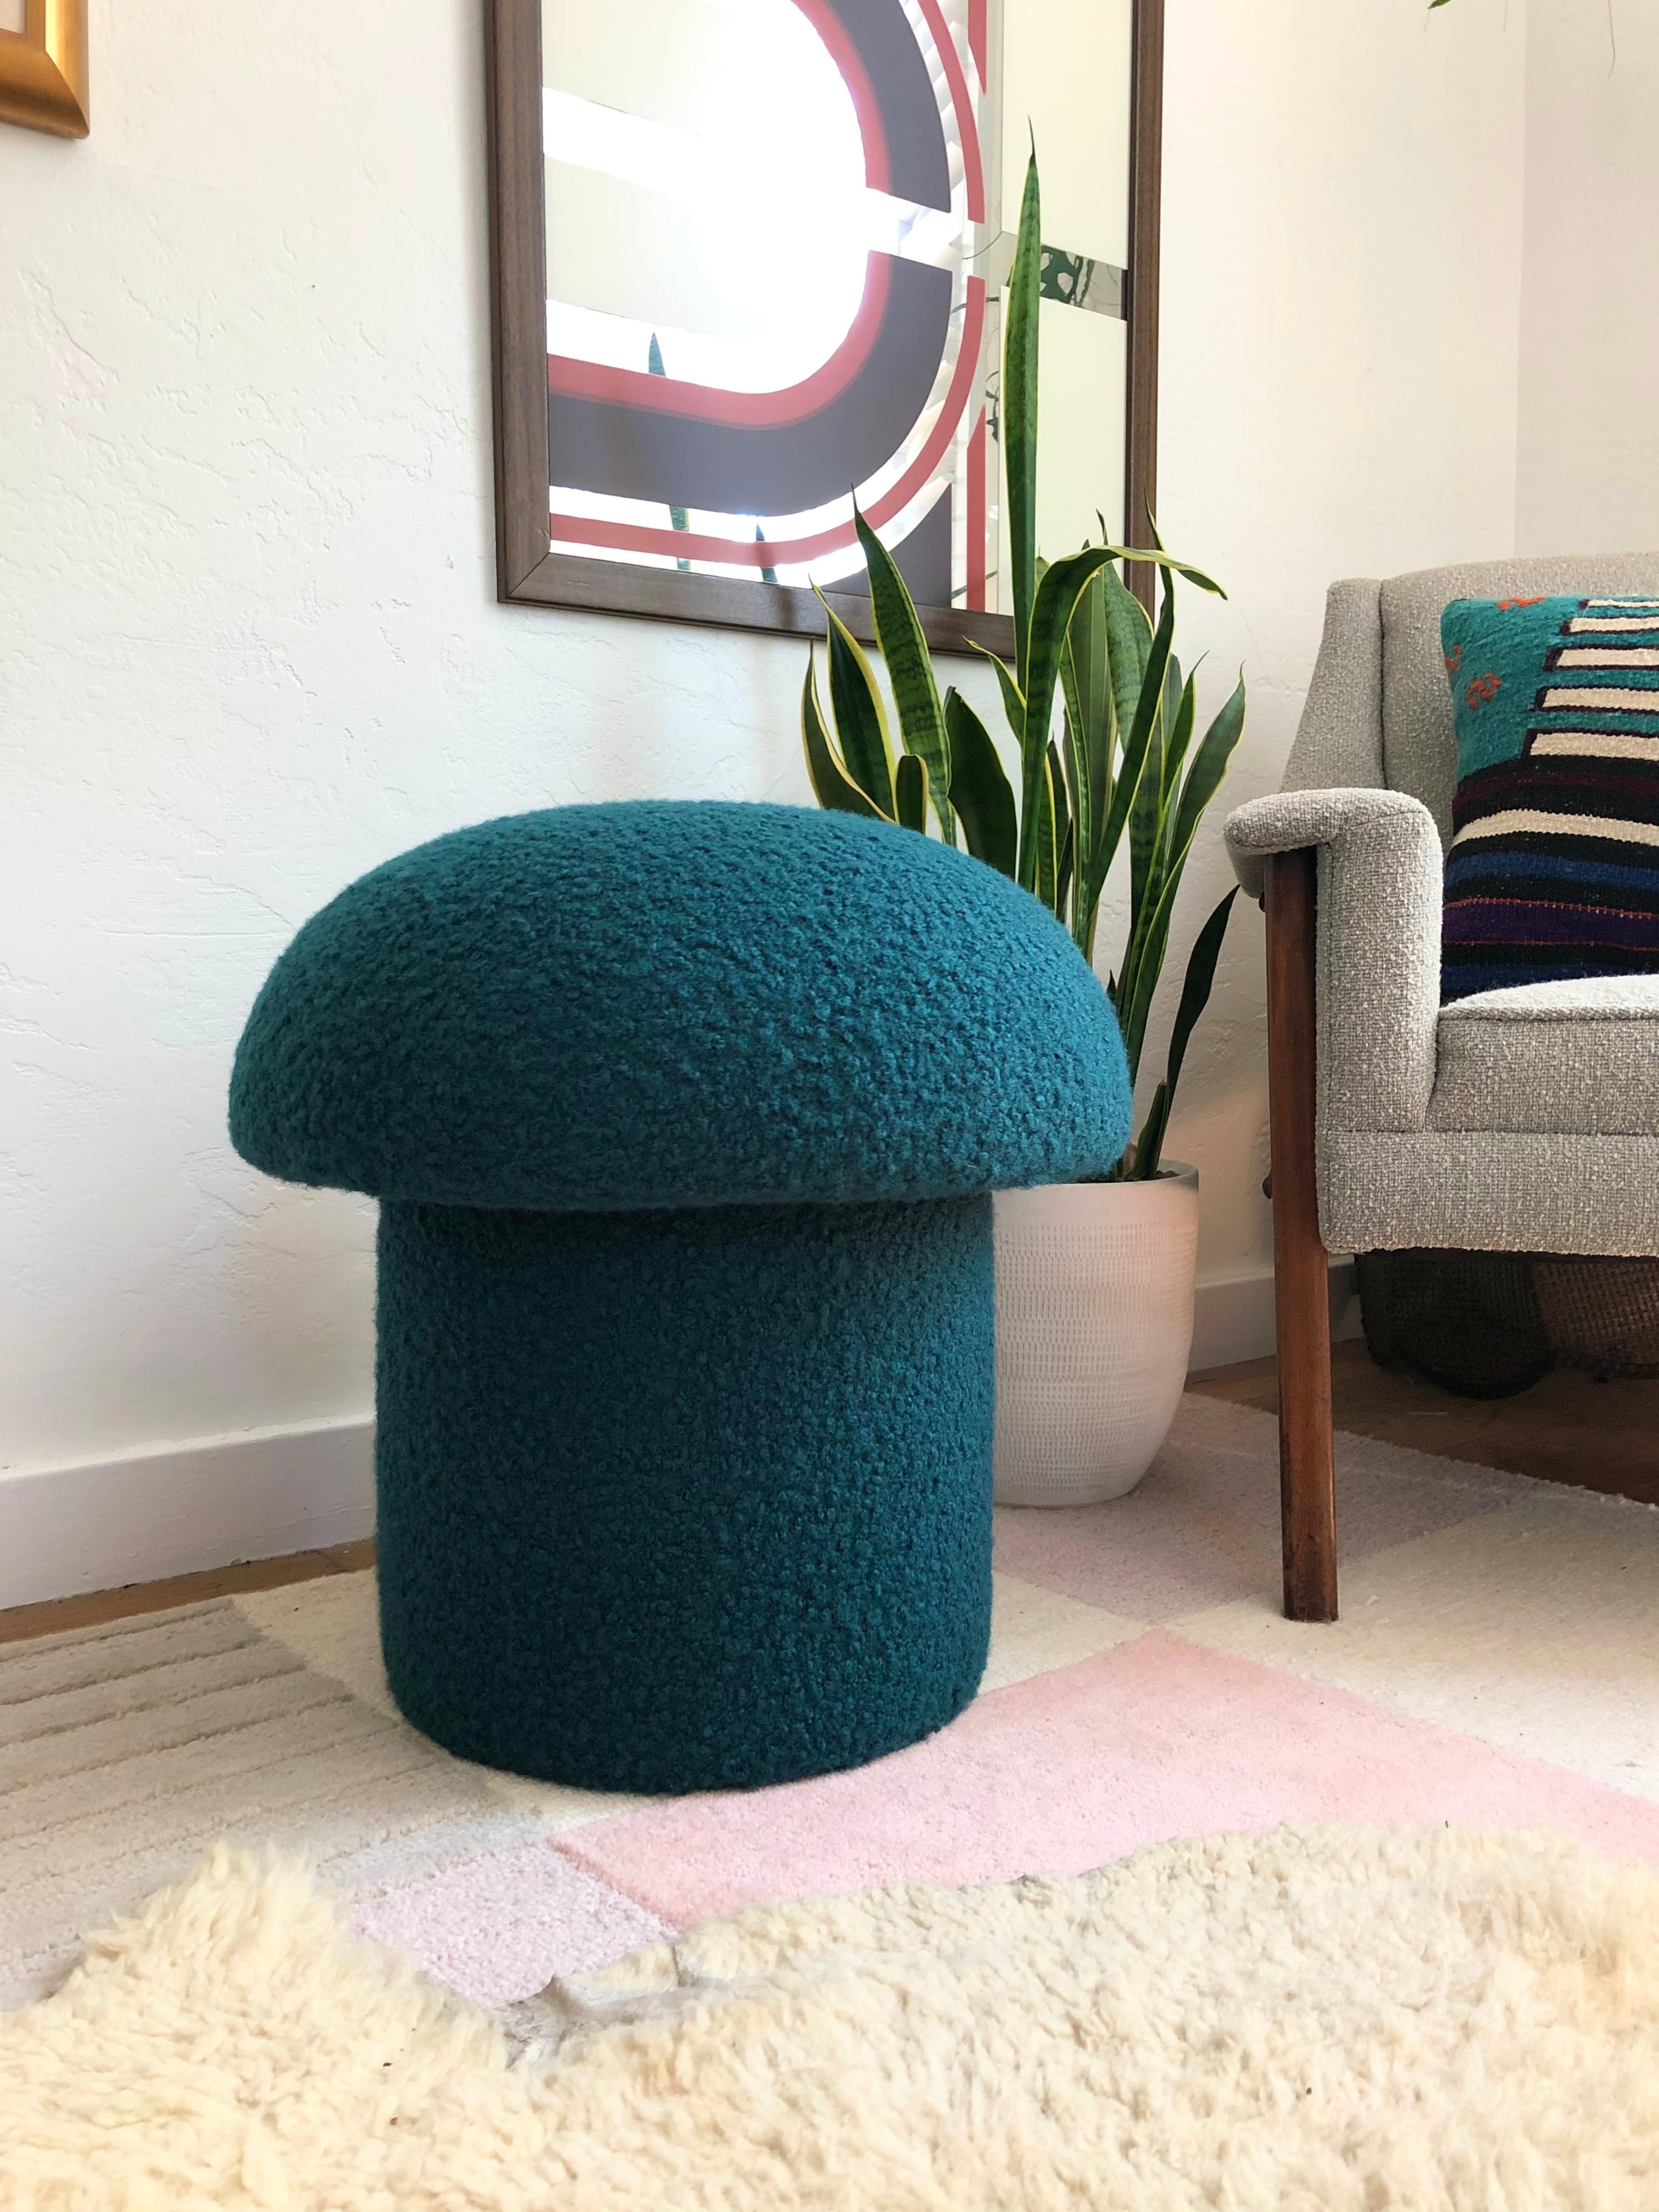 A handmade mushroom shaped ottoman, upholstered in a dark teal colored curly boucle fabric. Perfect for using as a footstool or extra occasional seating. A comfortable cushioned seat and sculptural accent piece.